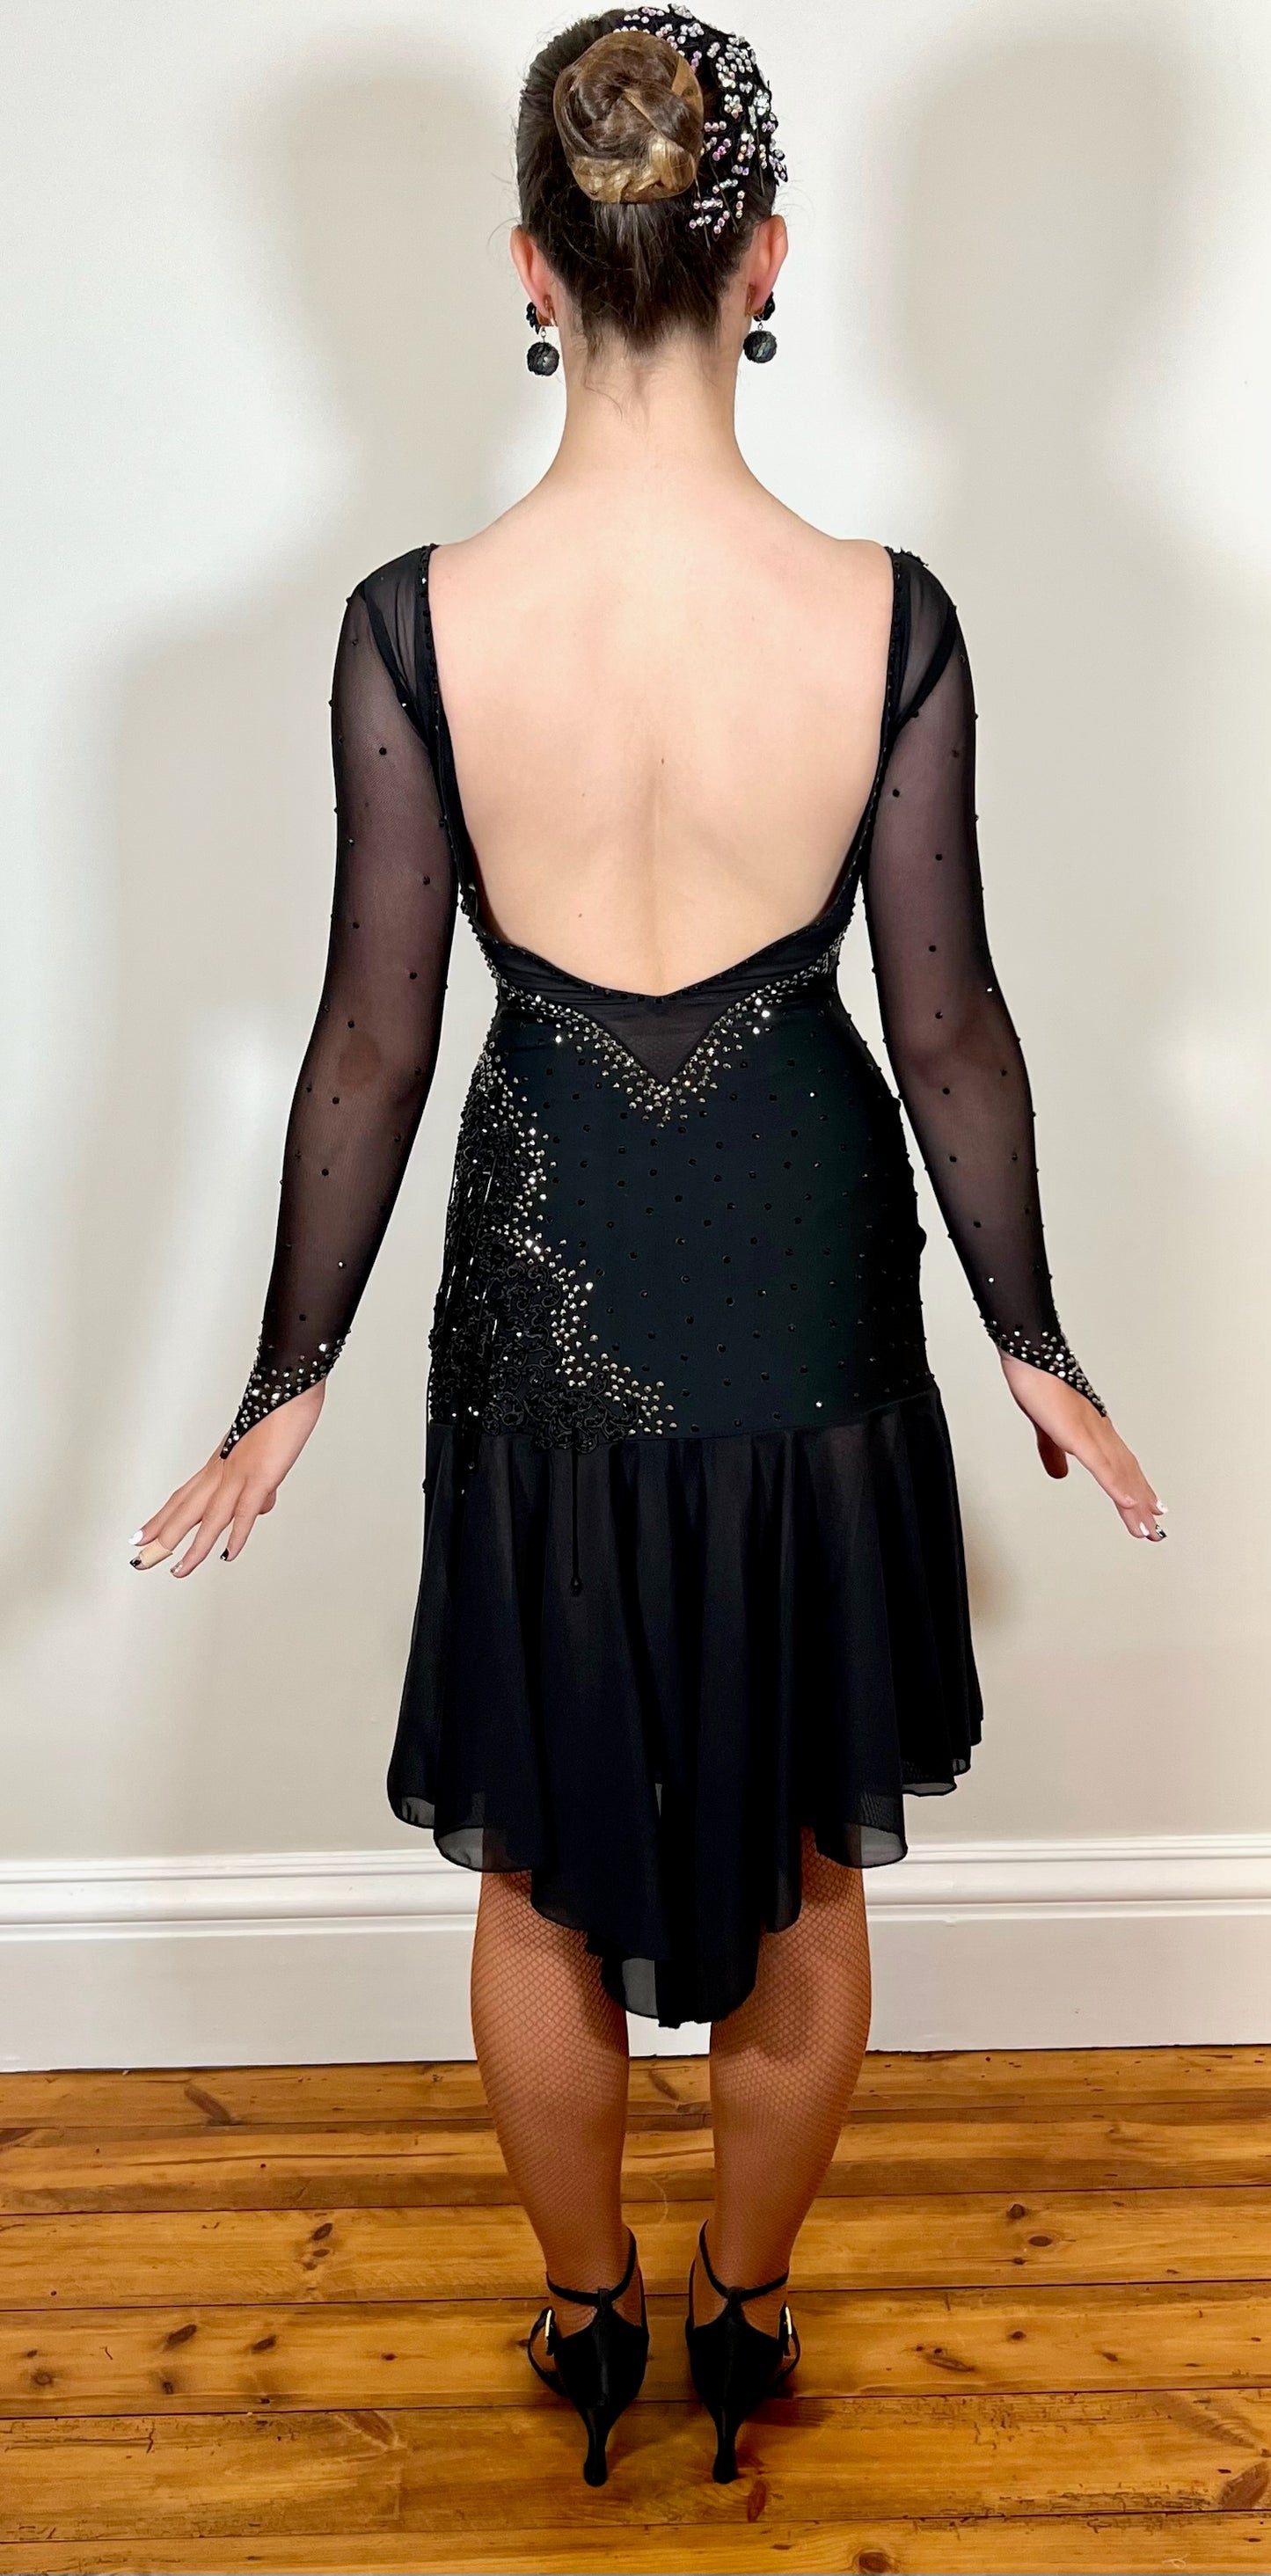 218 Black mesh & Nude Dress. Full skirt with side opening. Decorated with black droppers, black hematite & AB stones